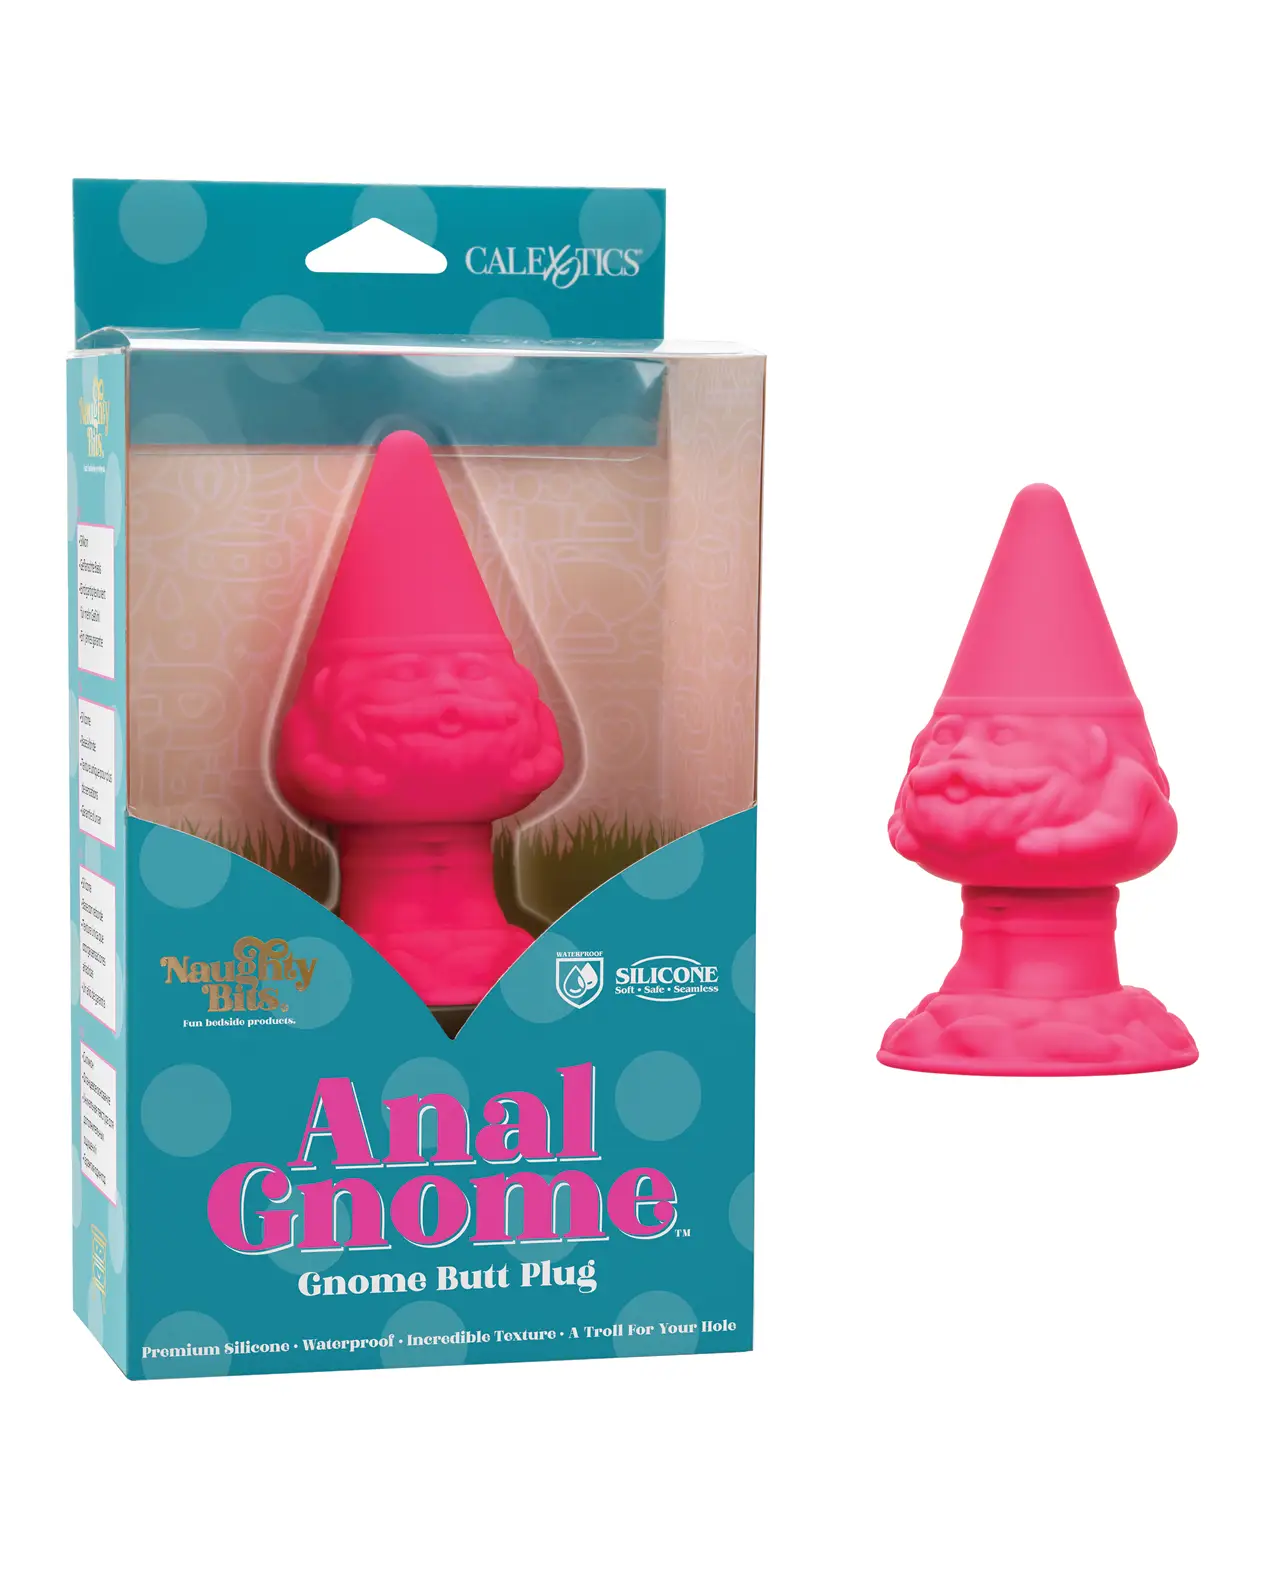 A humorous anal plug with a gnome face in a blue and see through box